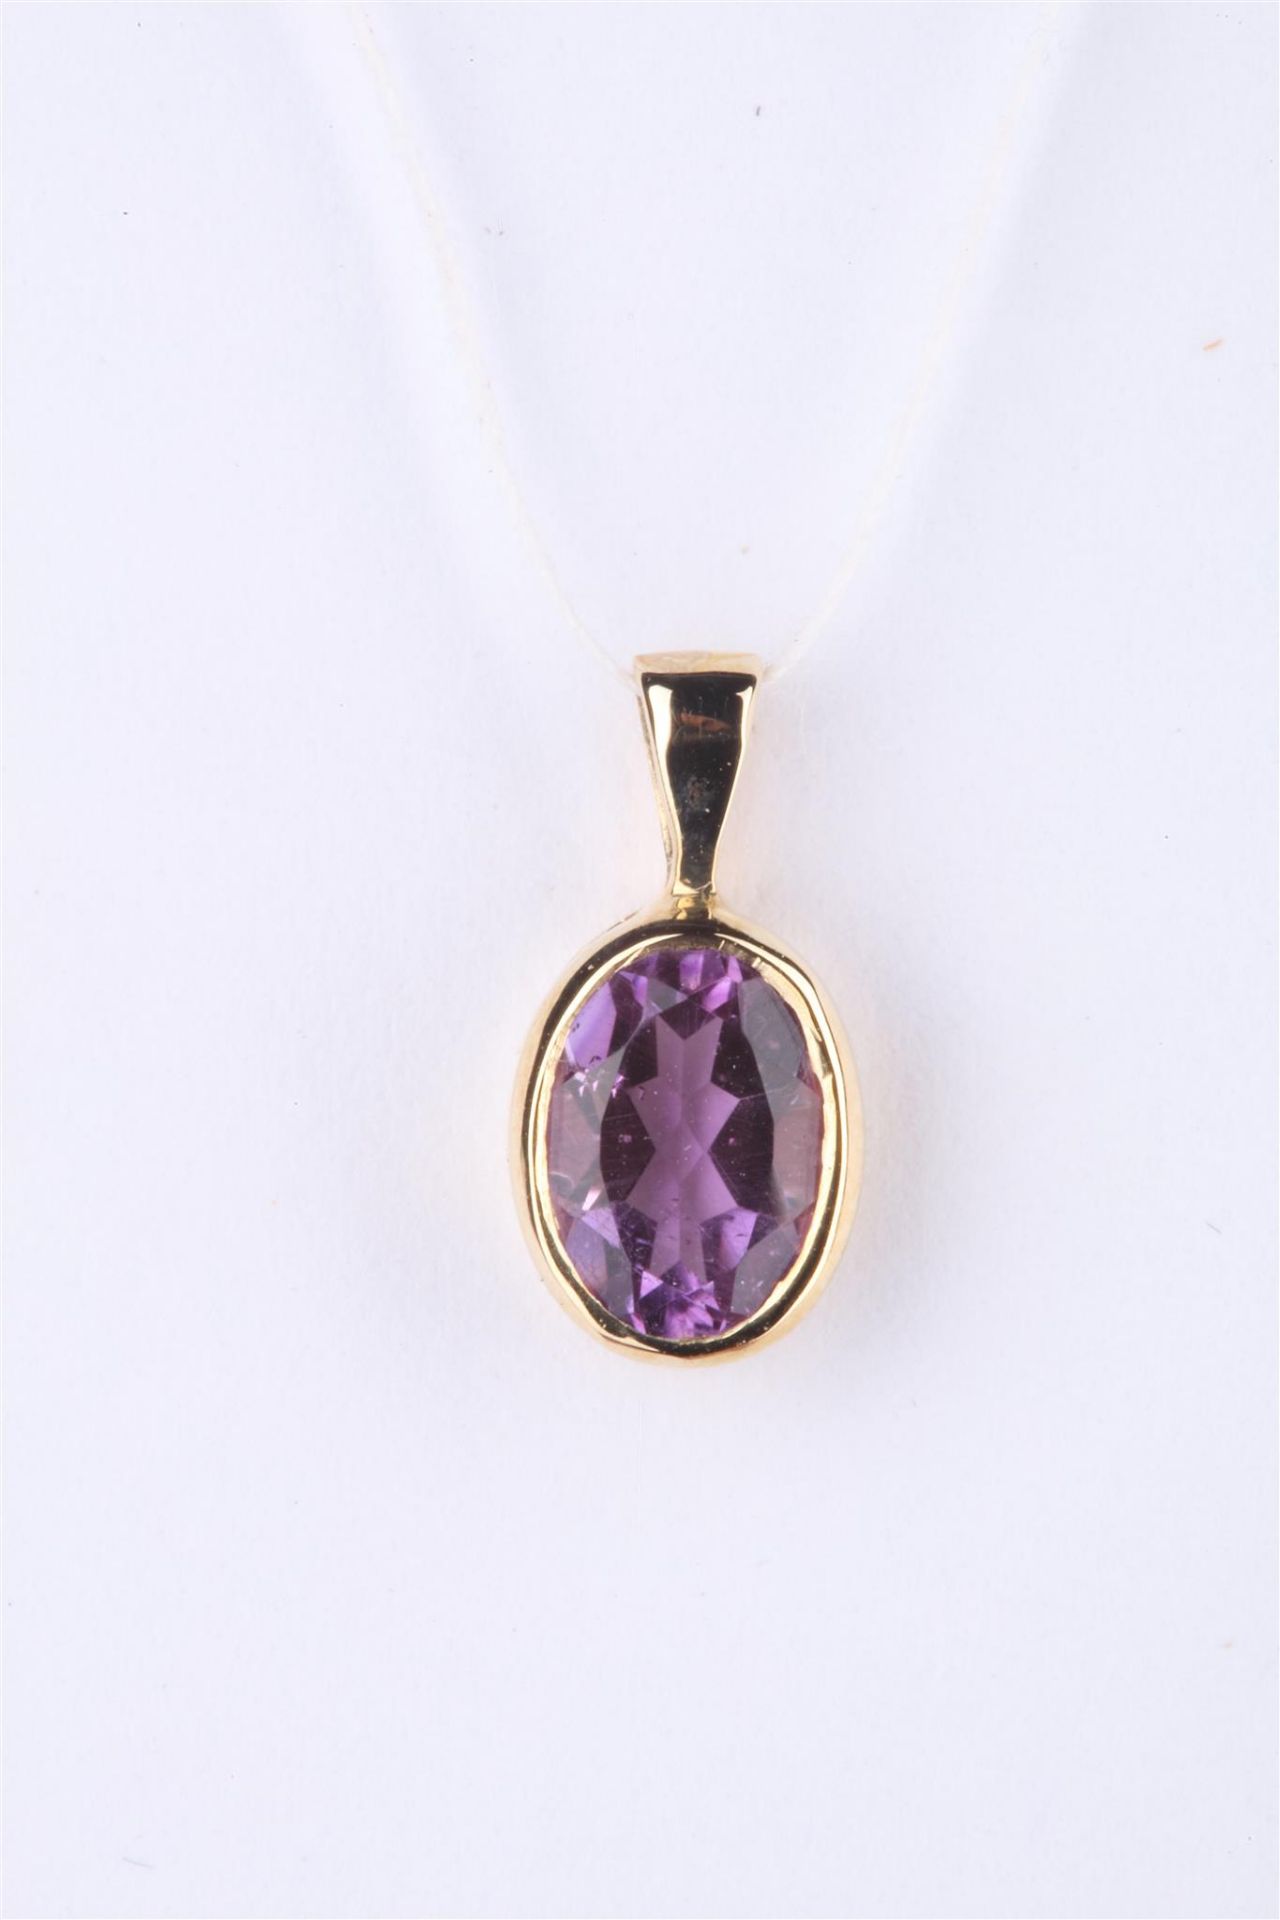 + VAT Ladies Gold Amethyst Pendant With Large Oval Amethyst